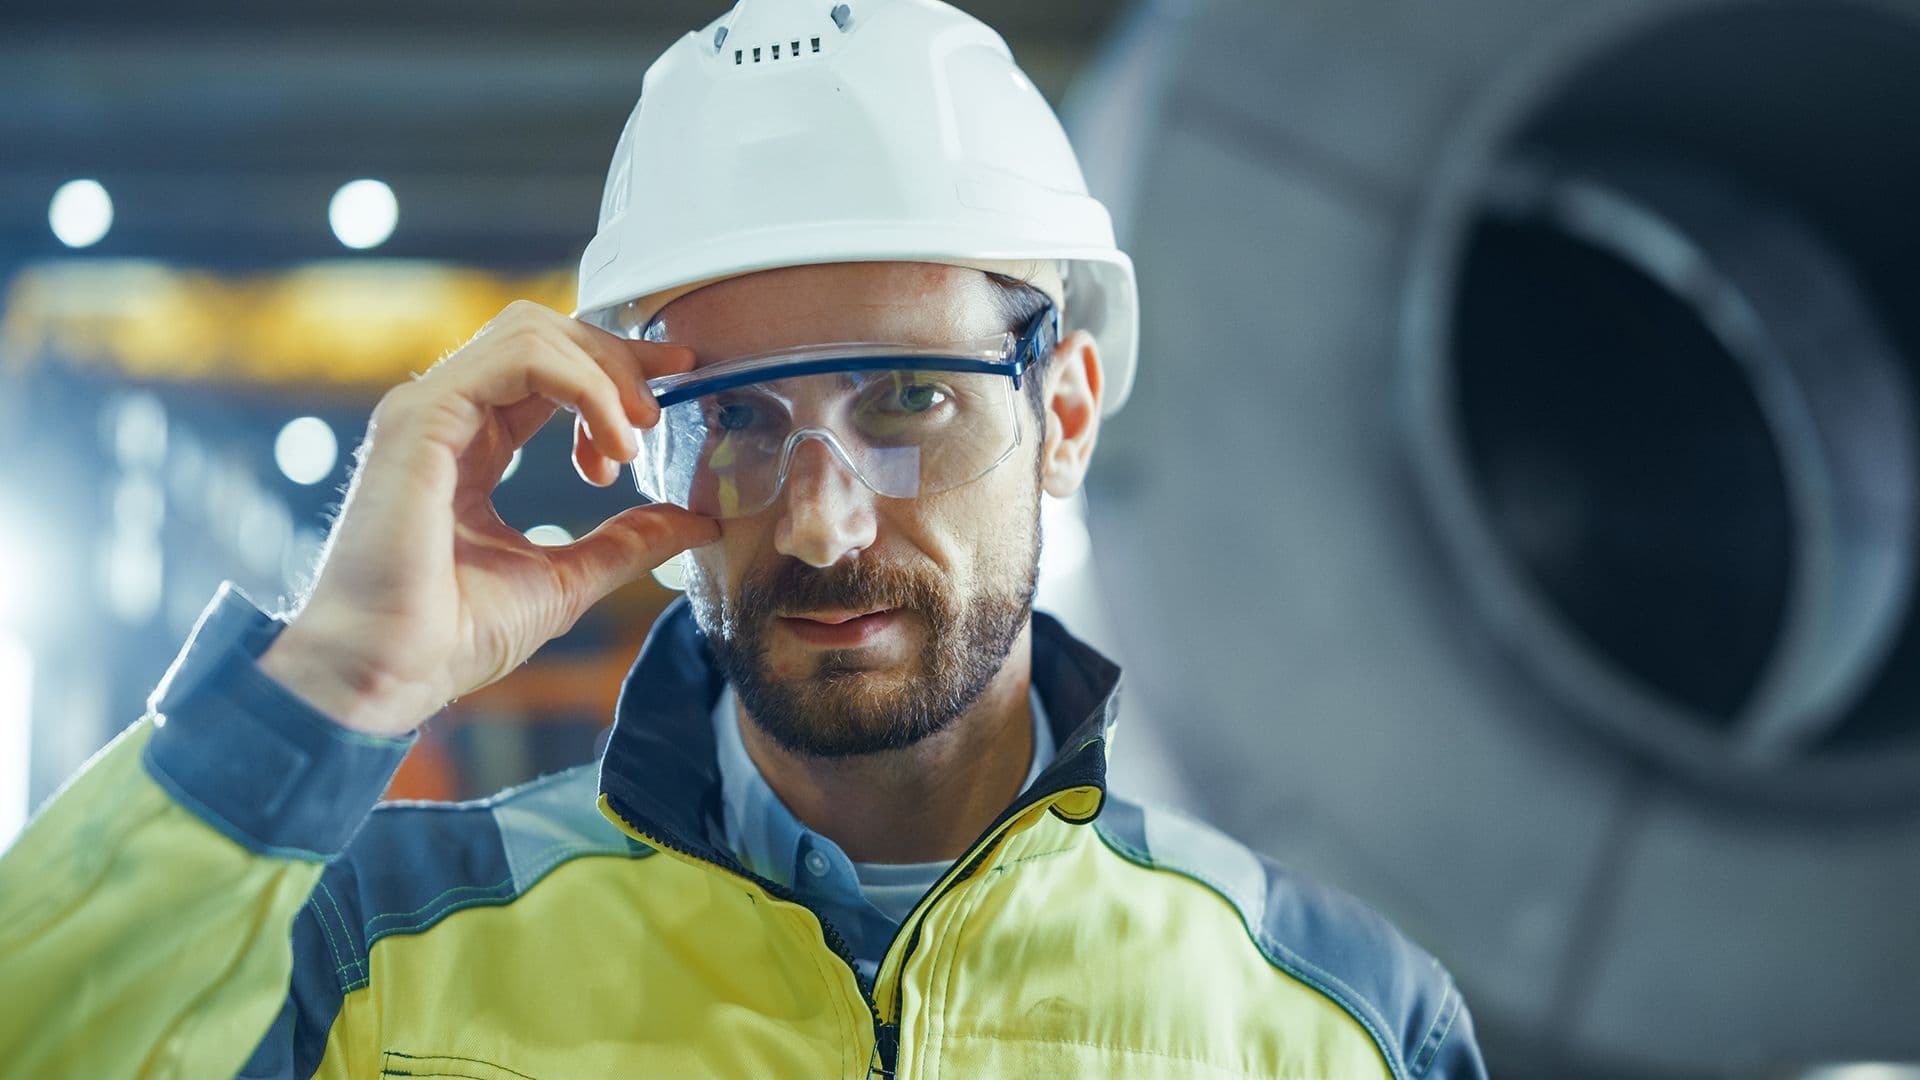 Enhance Your Safety with Smart Manufacturing Technology